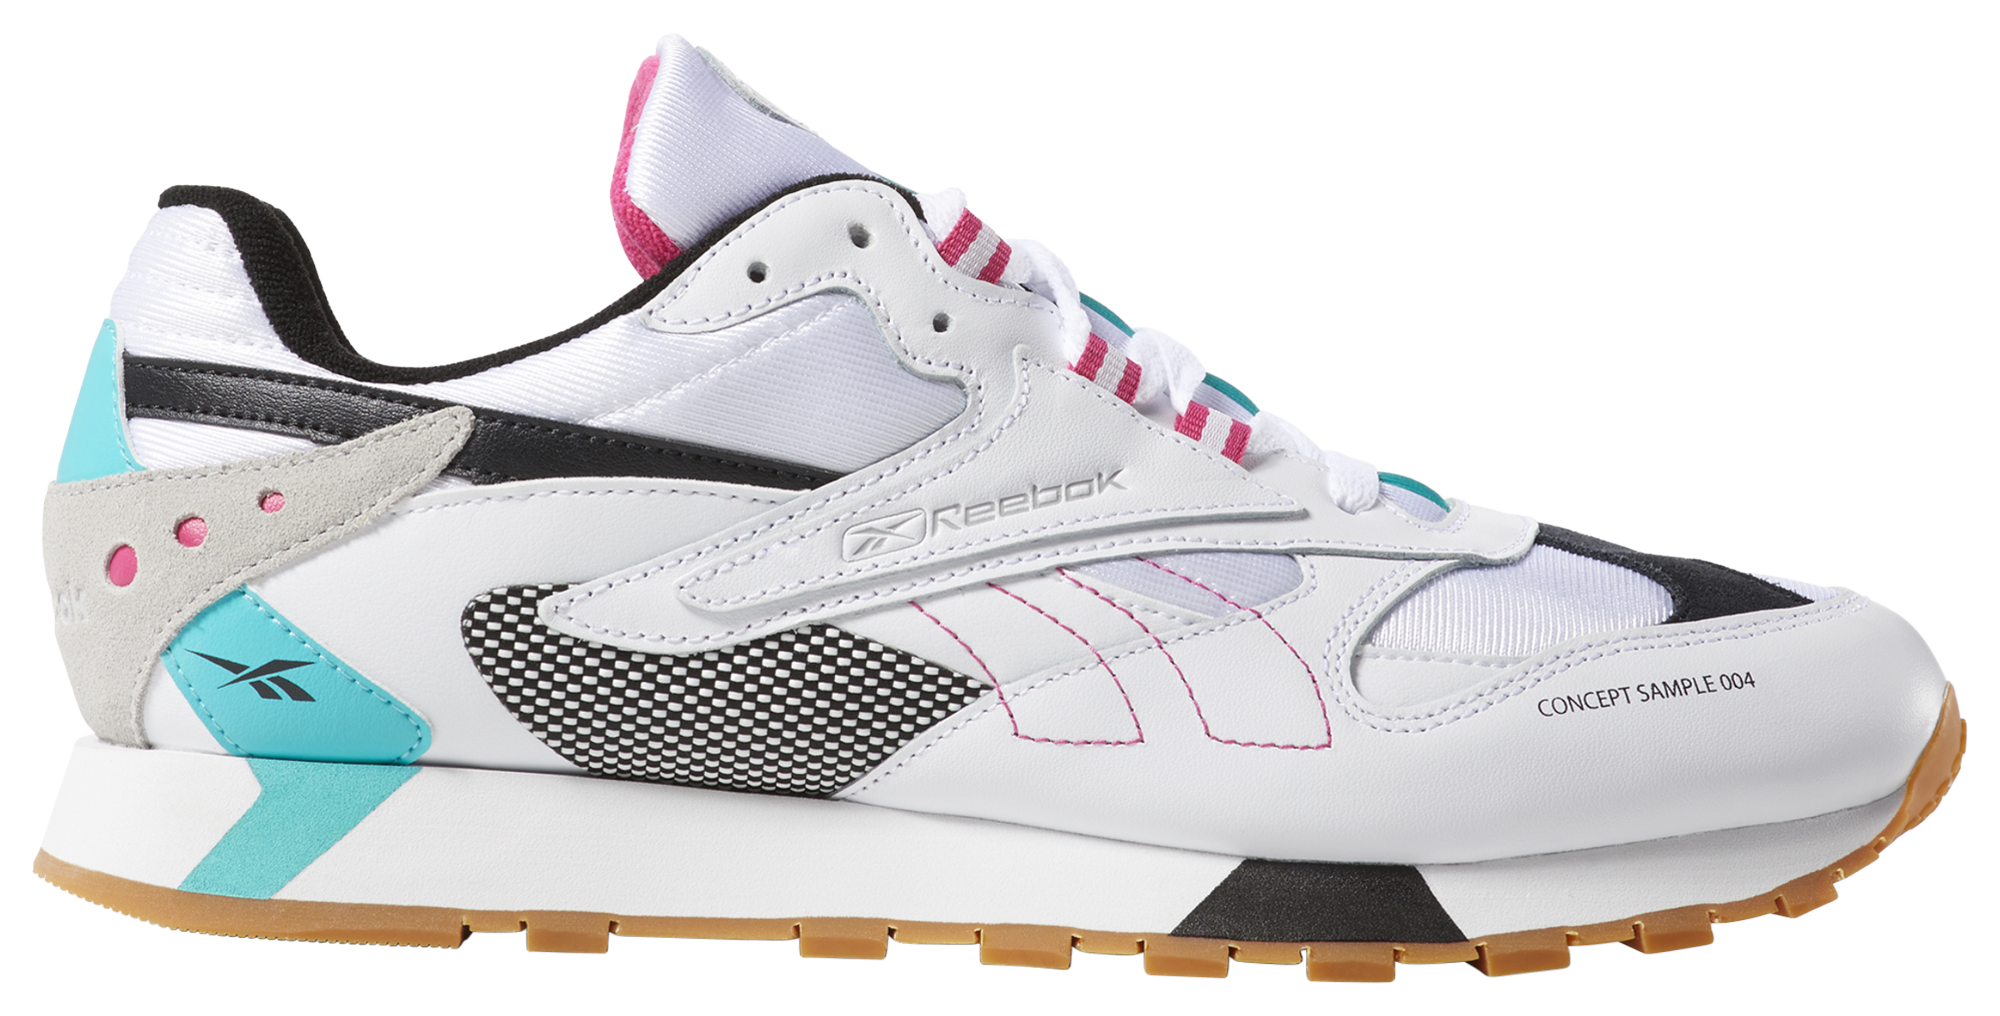 reebok classic leather altered mens